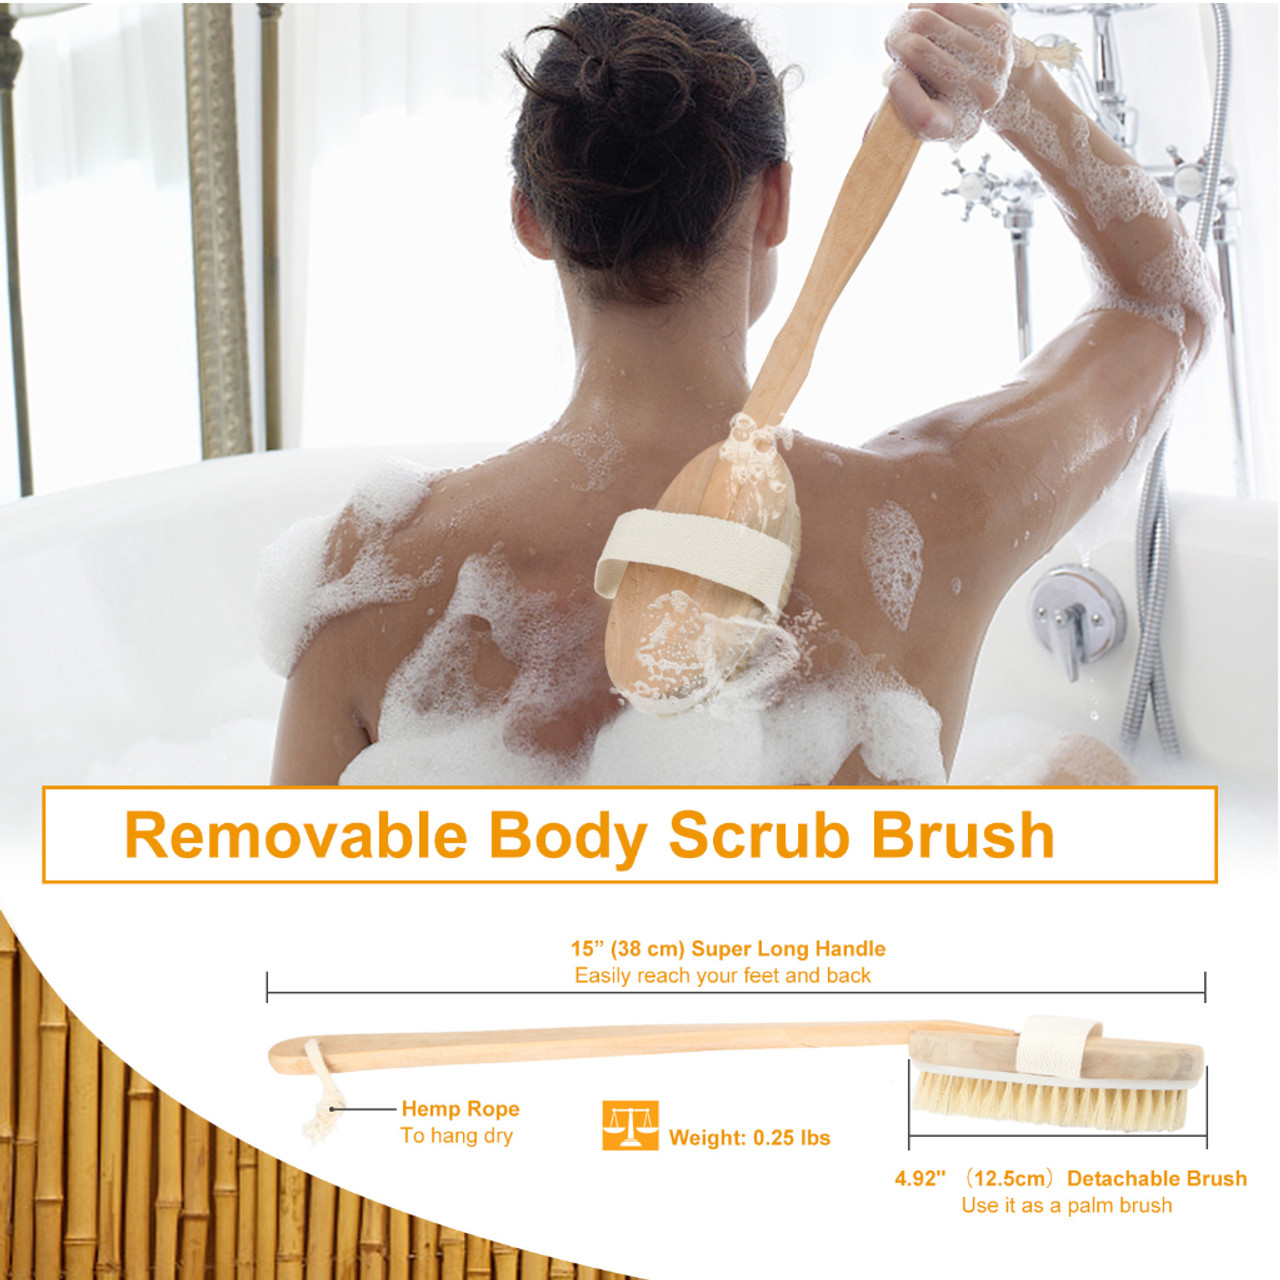 Long-Reach 15" Bath & Shower Brush with Detachable Handle product image